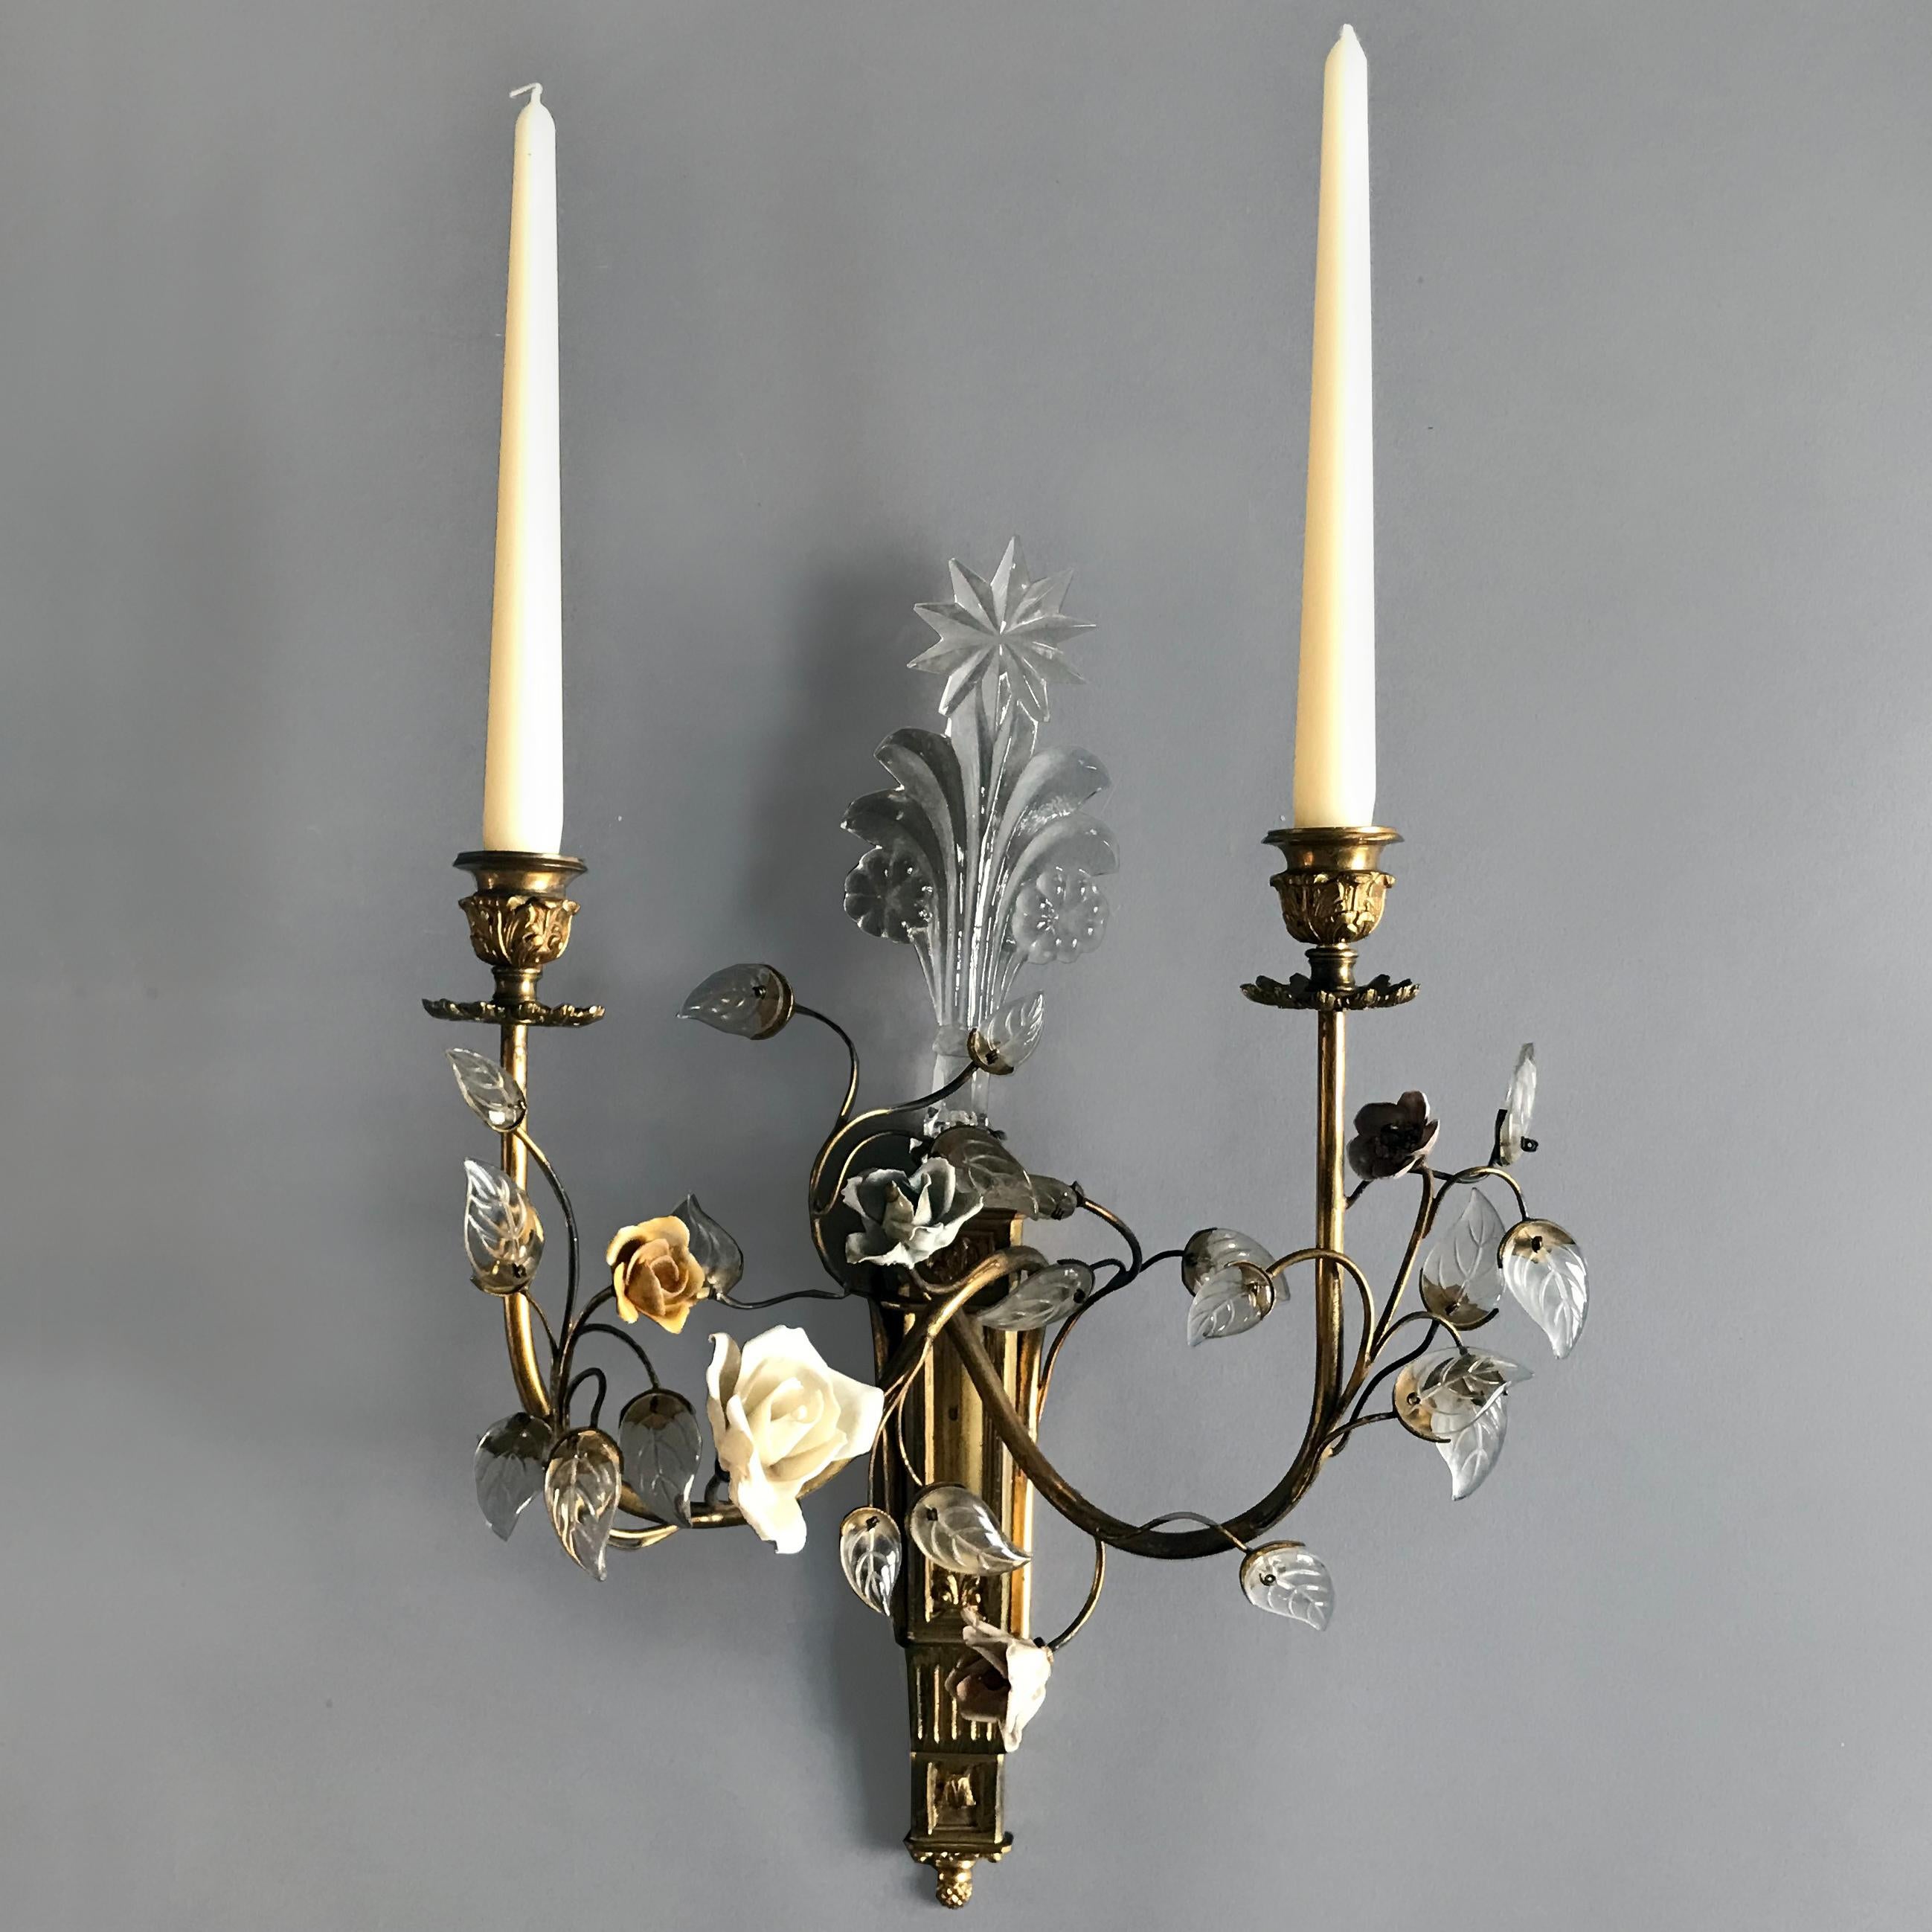 An impressive set of four Louis XVI style gilt bronze and porcelain mounted two and three-branch wall lights. Modelled with porcelain flowers, glass leaves and a flamboyant glass star cresting. Minor nibbles to the porcelain flowers. Measurements